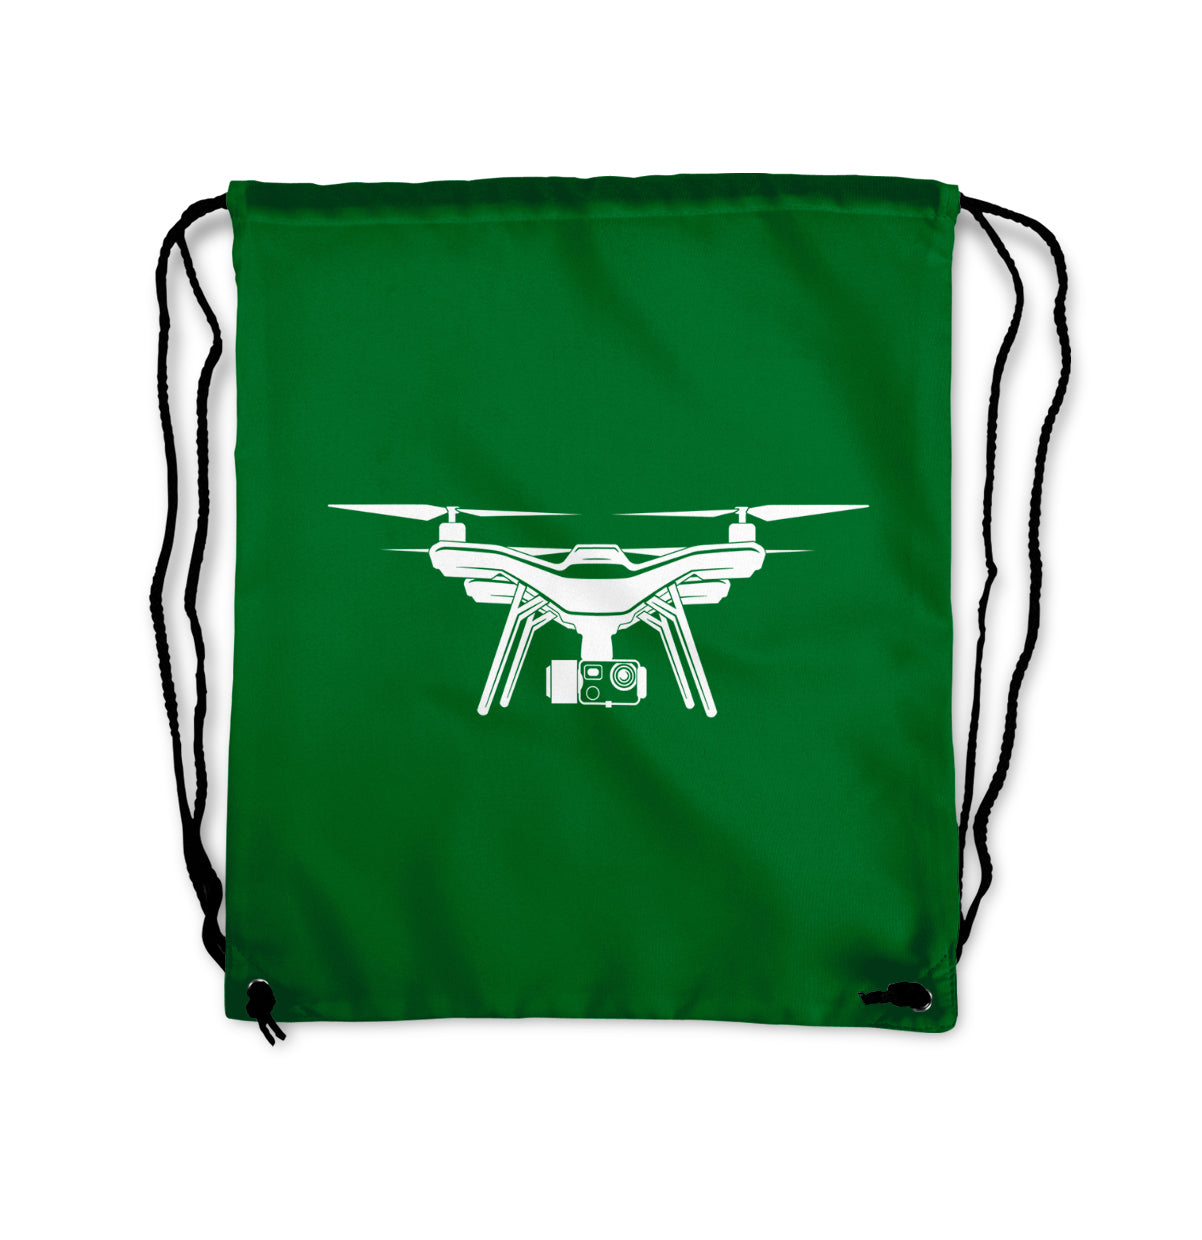 Drone Silhouette Designed Drawstring Bags